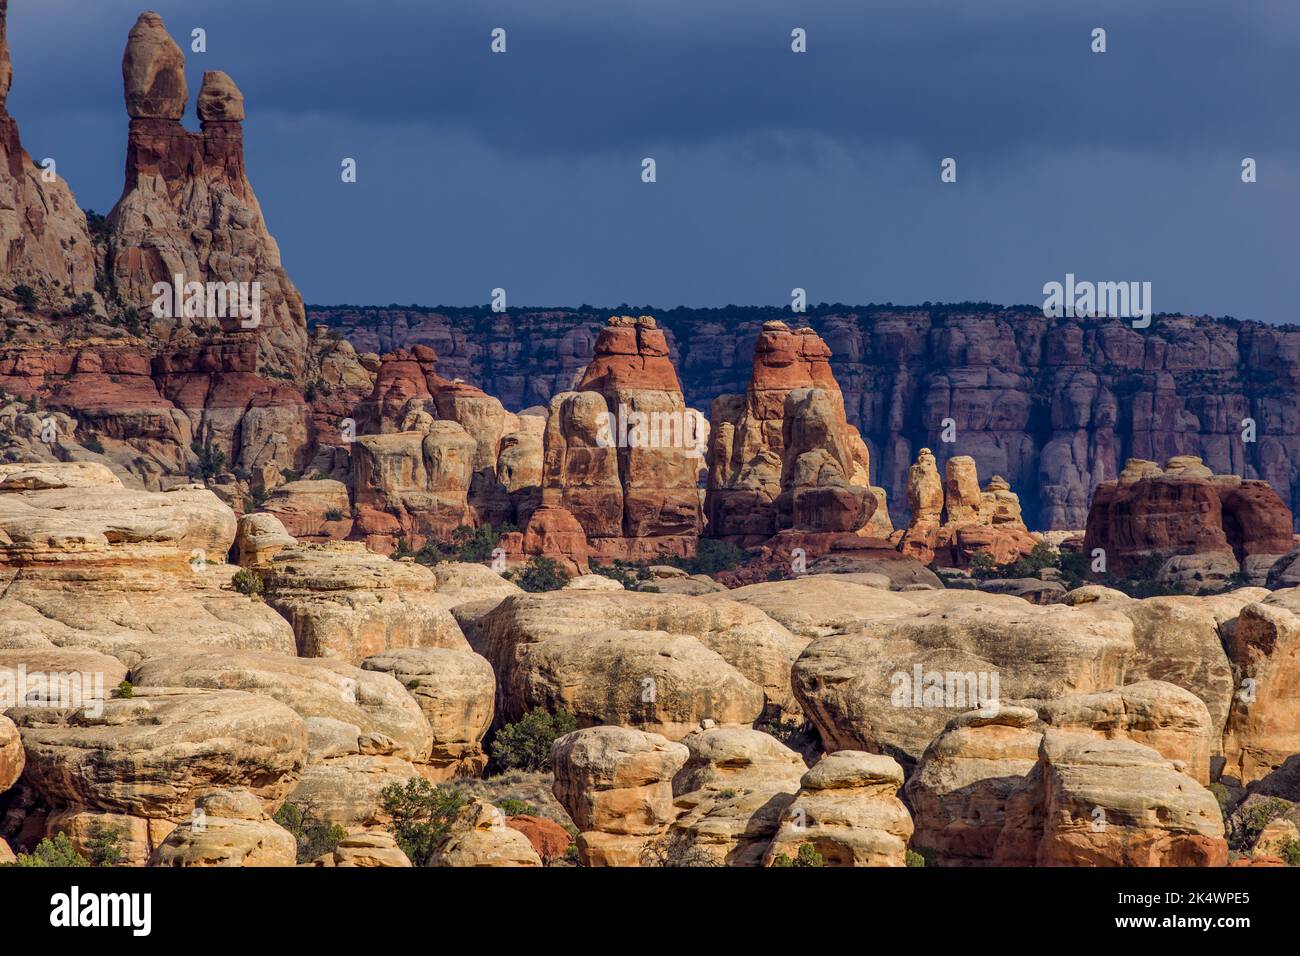 Storm light on Cedar Mesa sandstone formations in the Needles District, Canyonlands National Park, Utah. Stock Photo